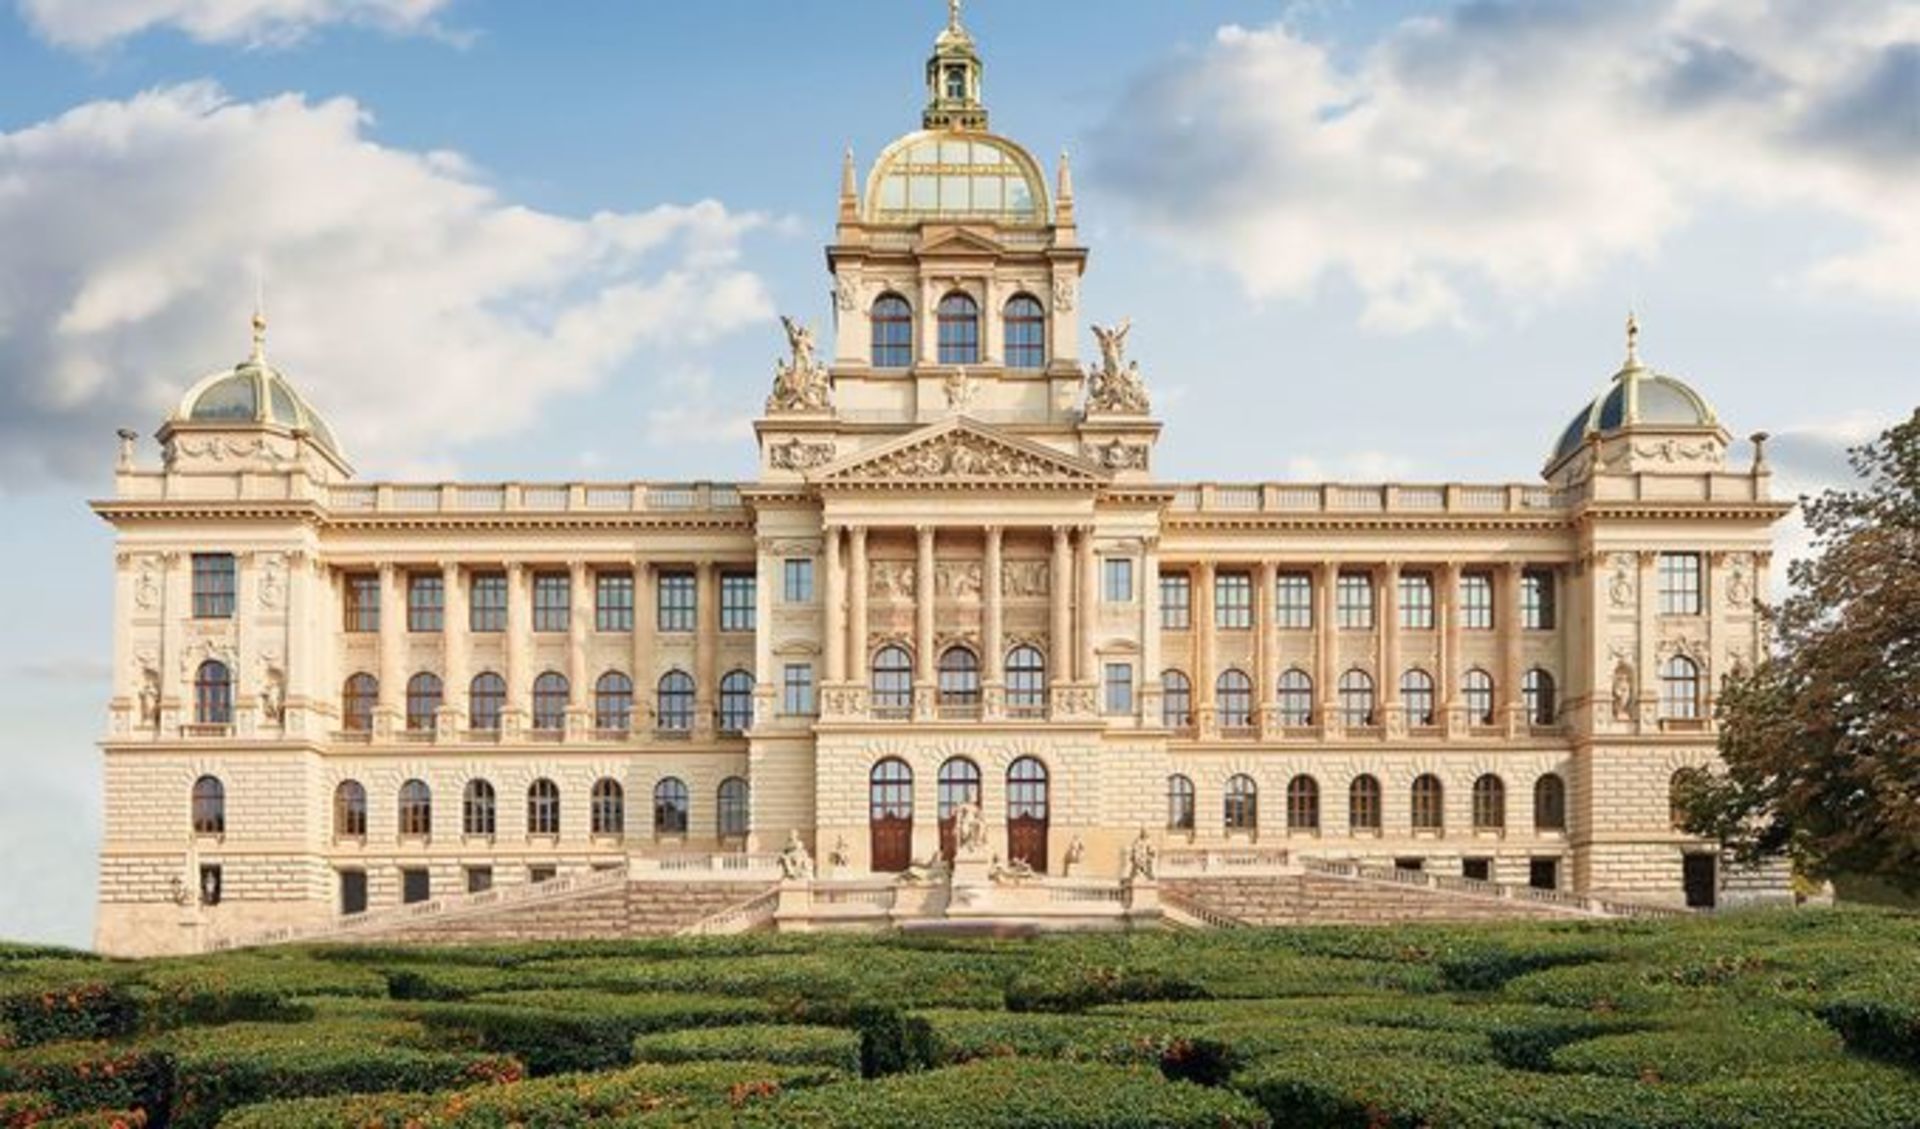 The National Museum of the Czech Republic